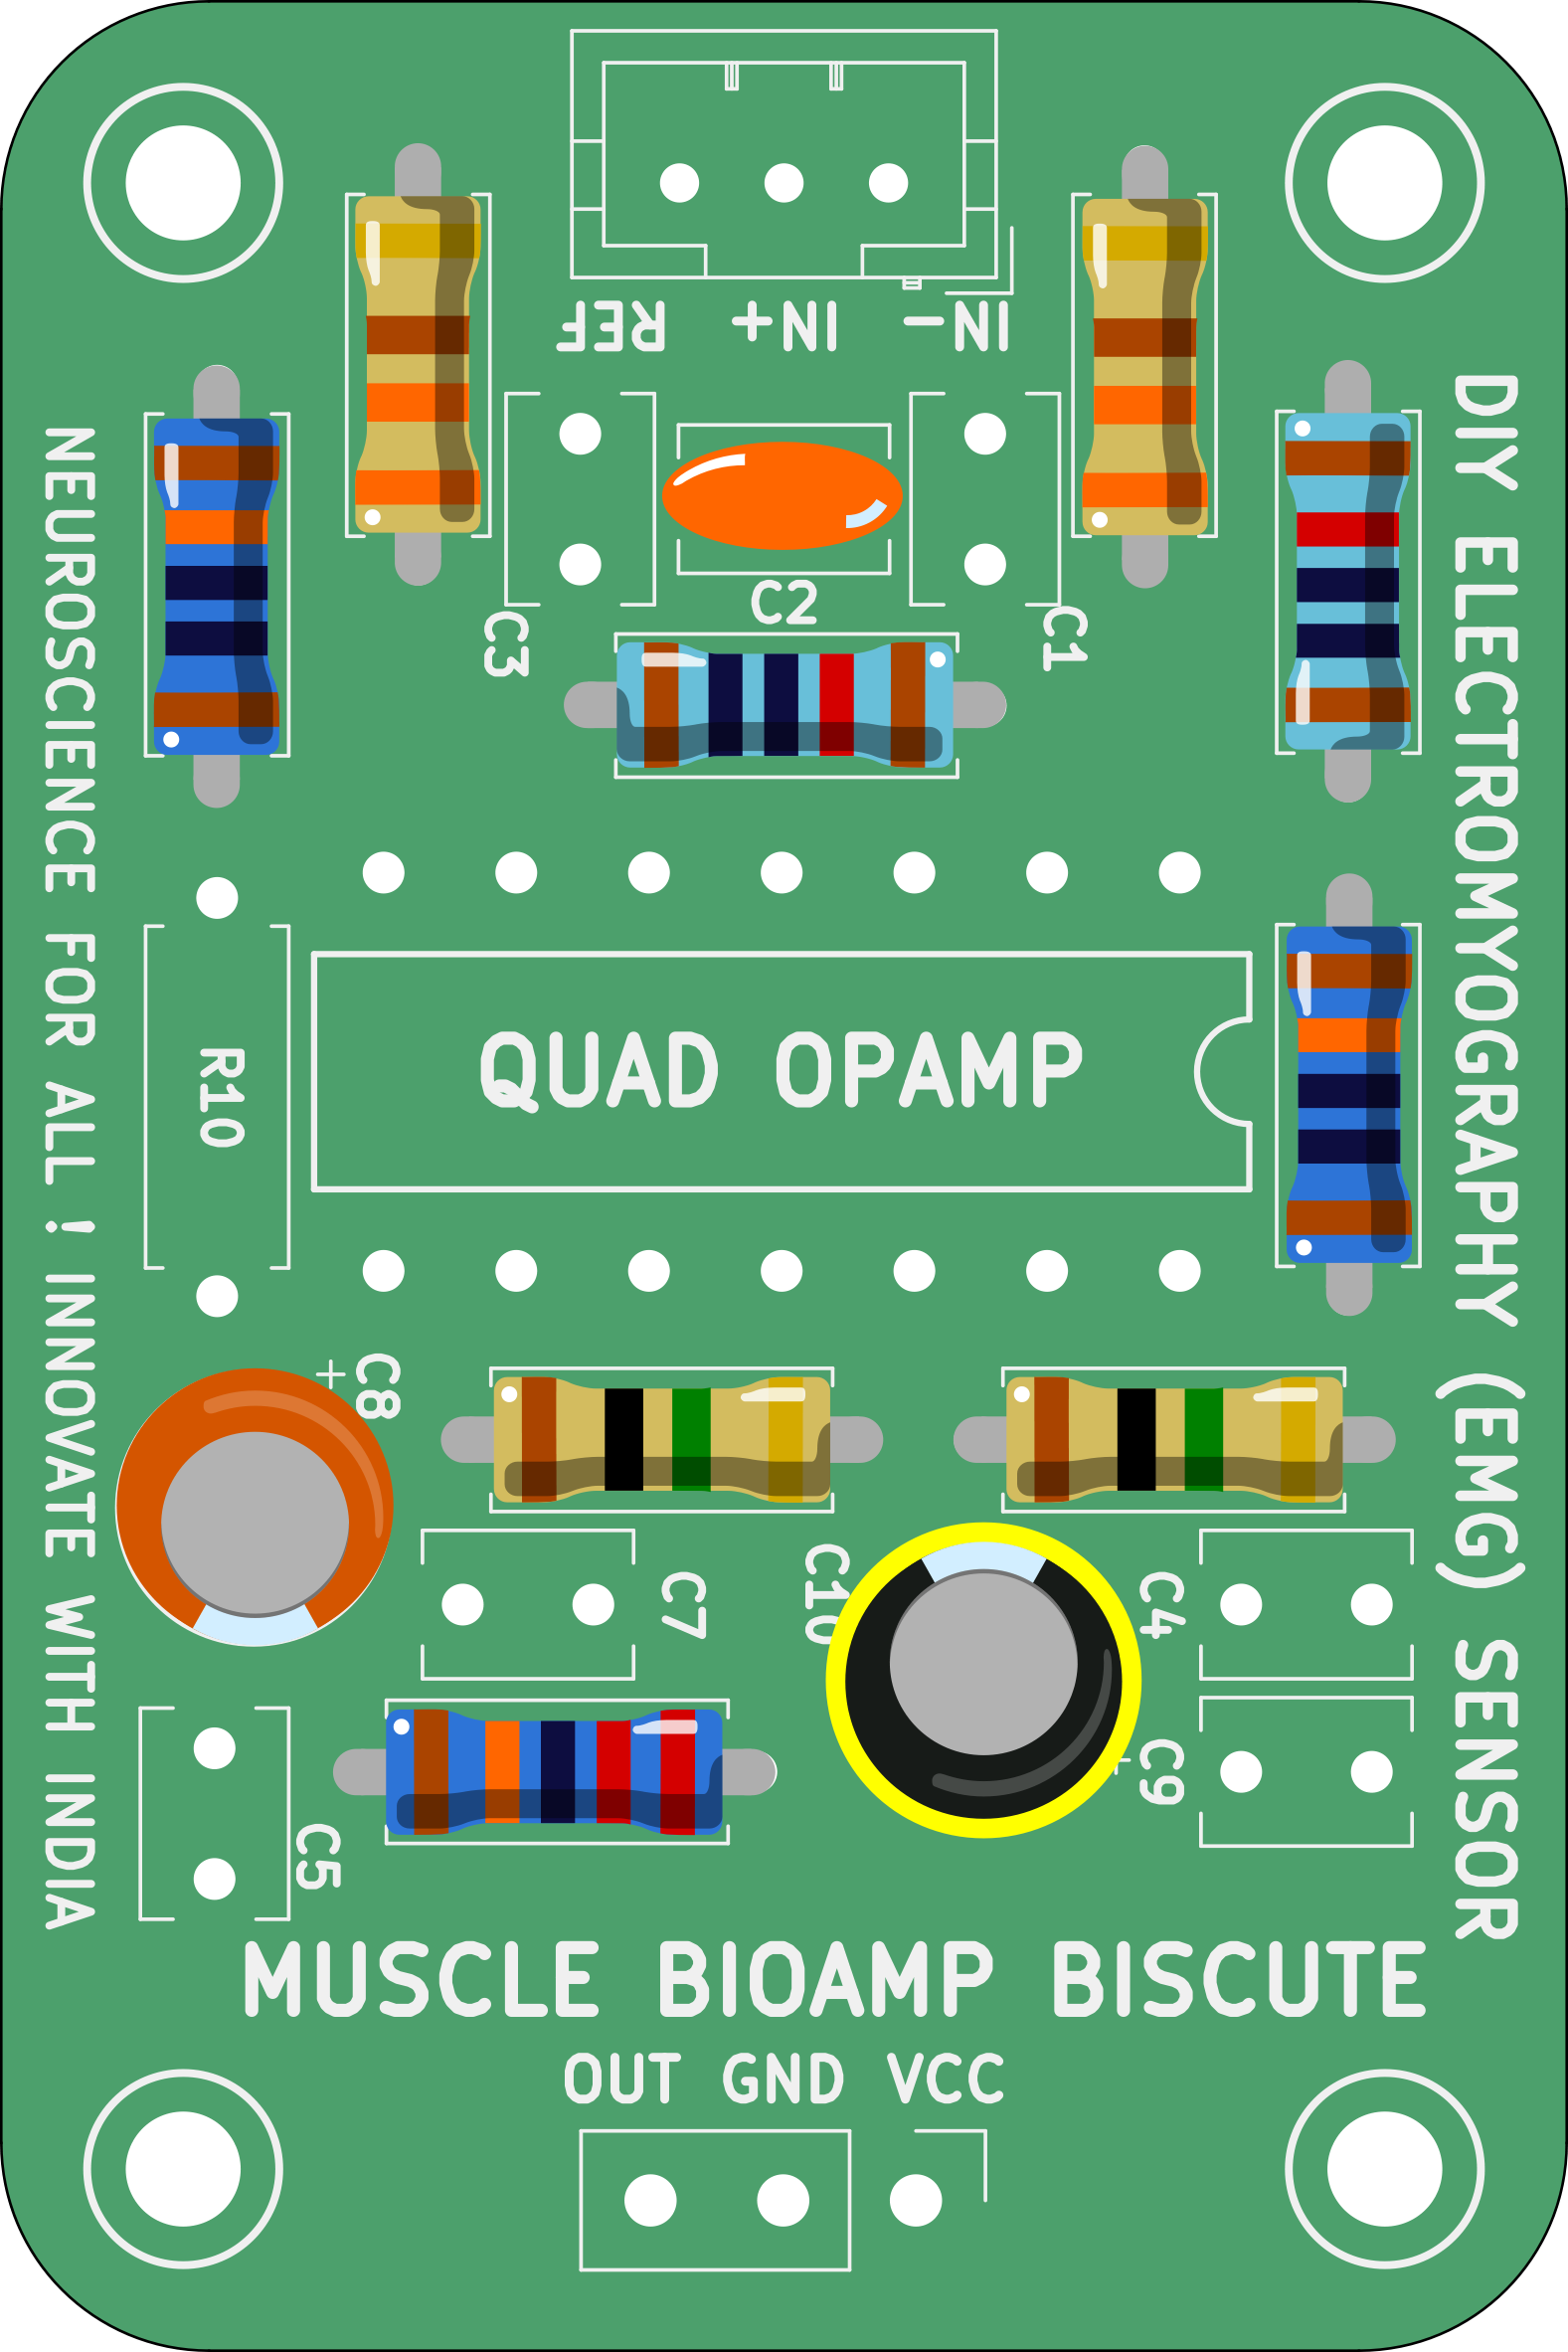 ../../../_images/009_470uF_Capacitor.png